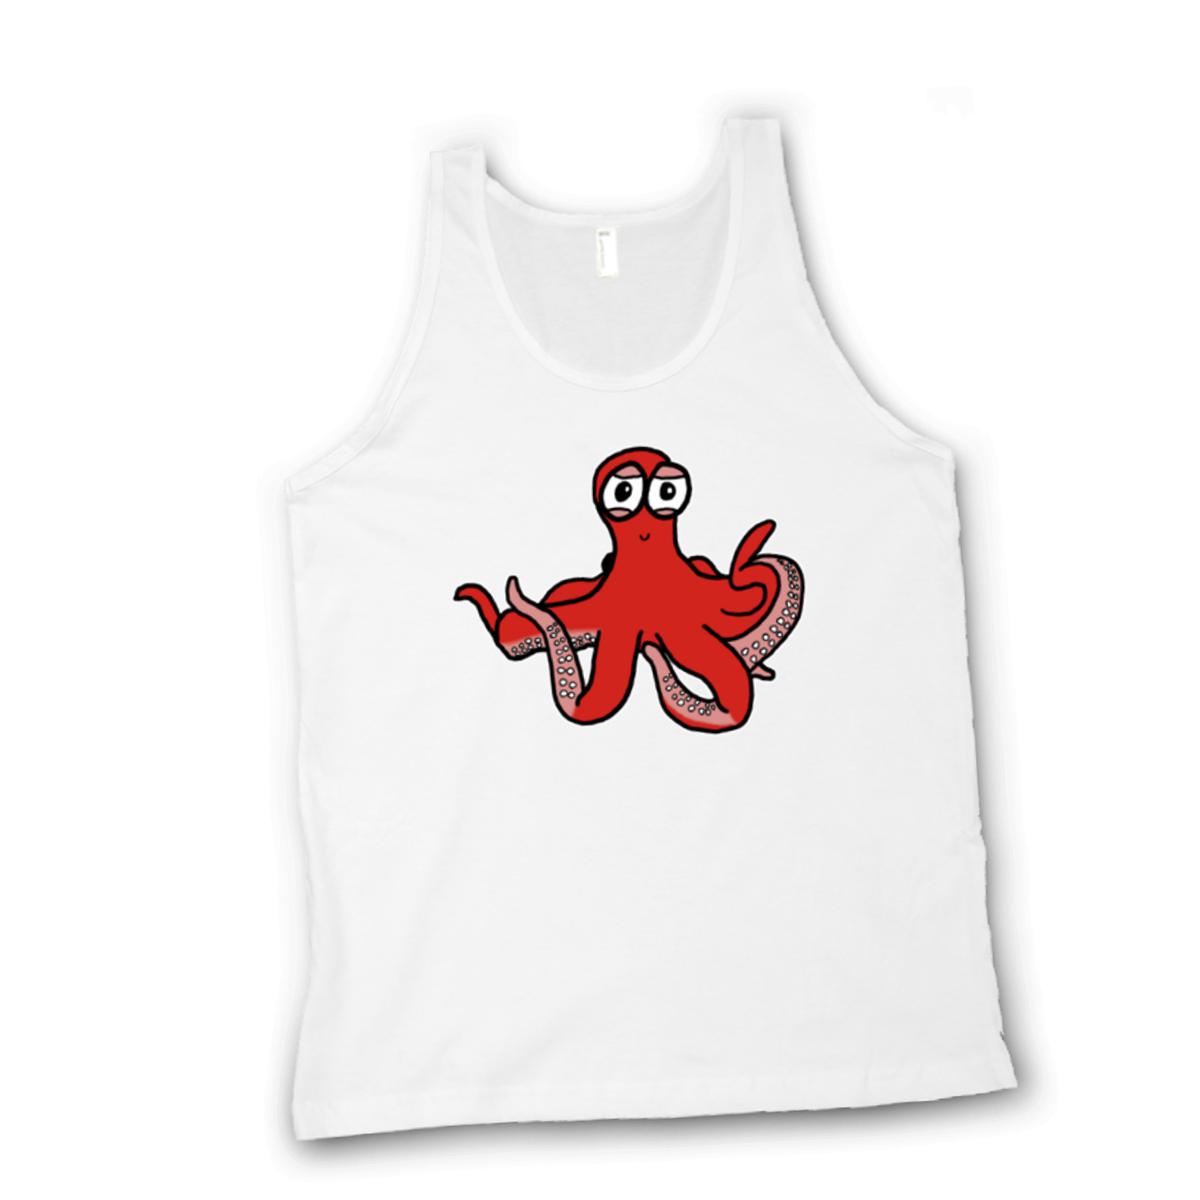 Octopus Unisex Tank Top Double Extra Large white